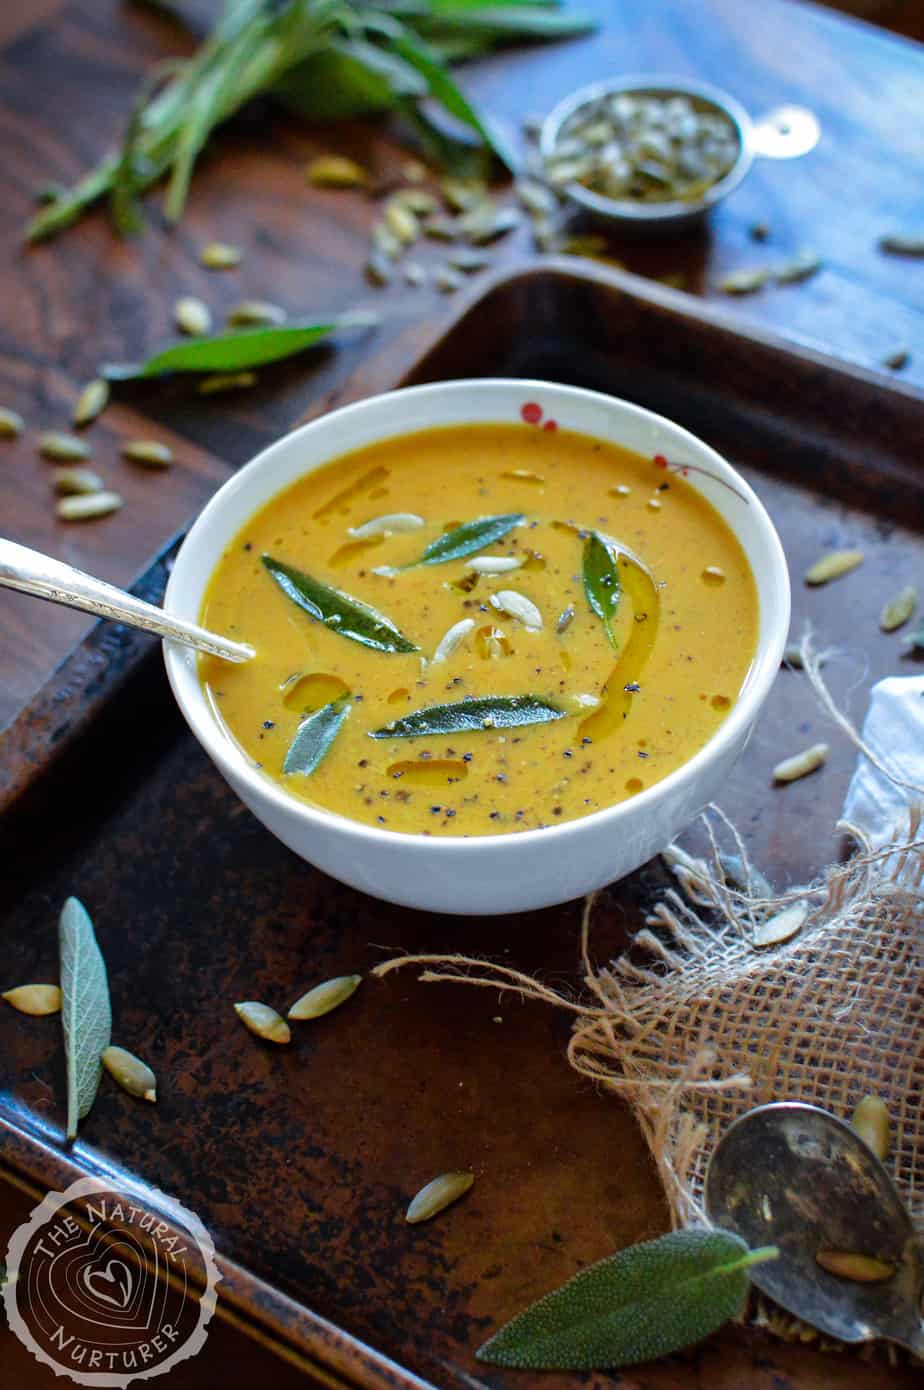 Savory Pumpkin Soup served on a big tray with fresh herbs around the bowl